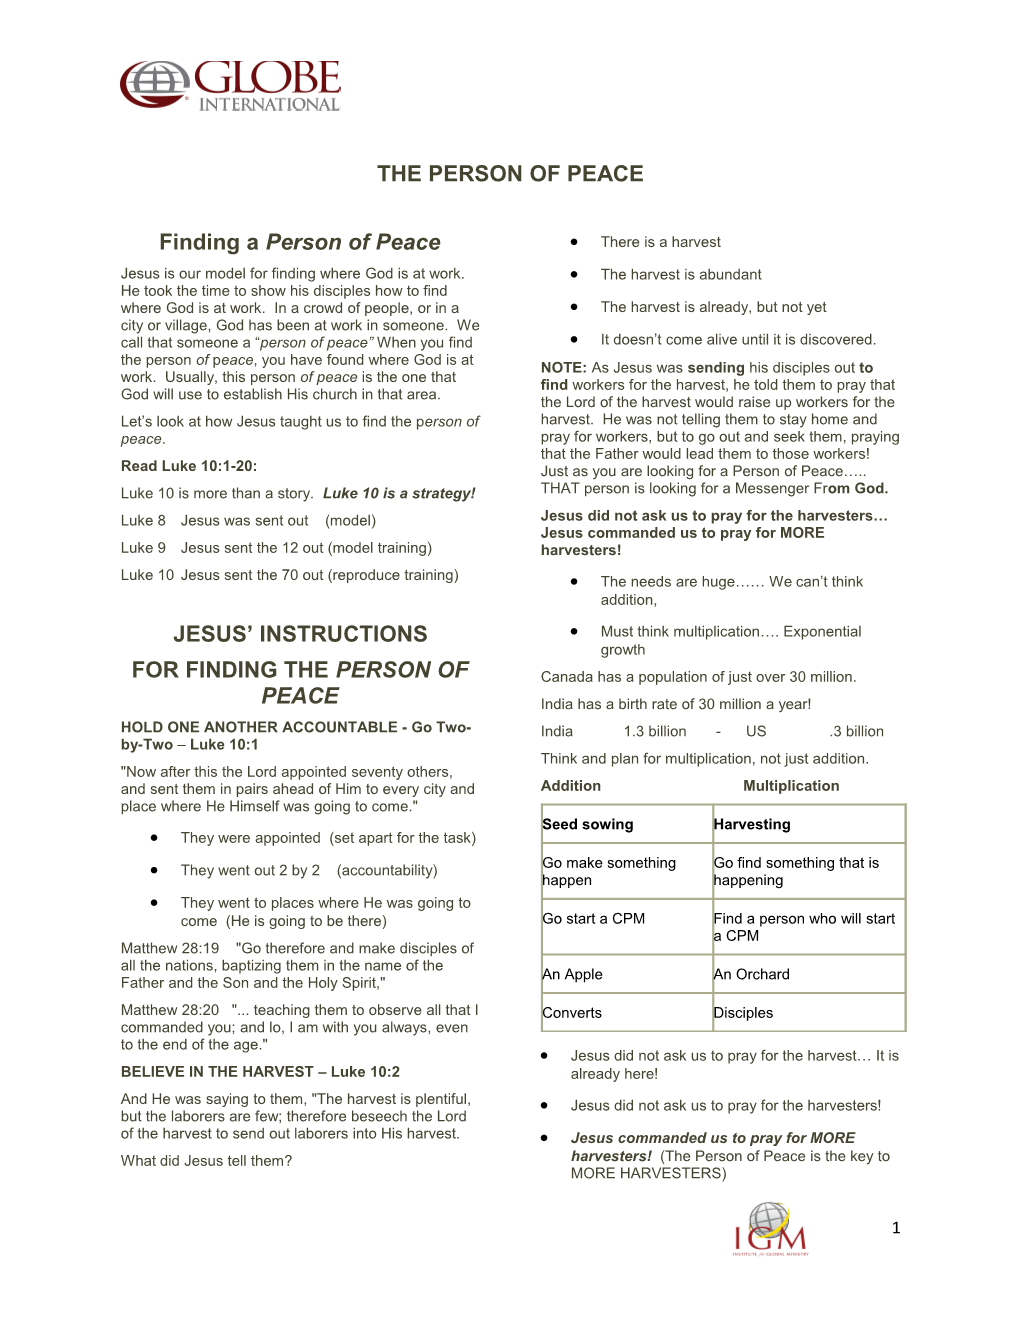 The Person of Peace